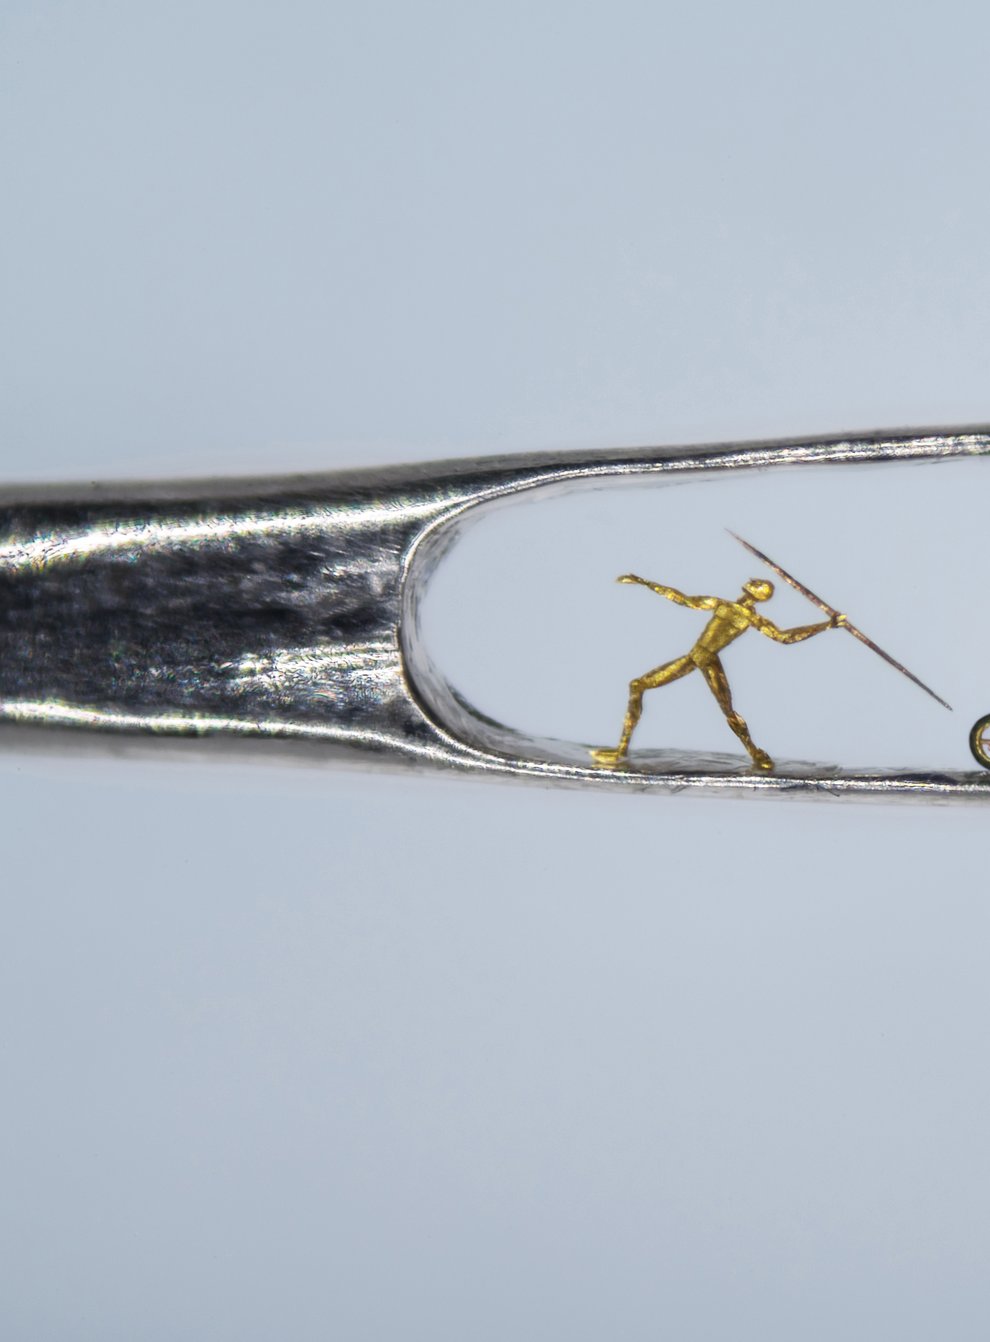 Dr Willard Wigan’s Aim for Gold Commonwealth Games tribute, set within the eye of a needle (Dr Willard Wigan/PA)